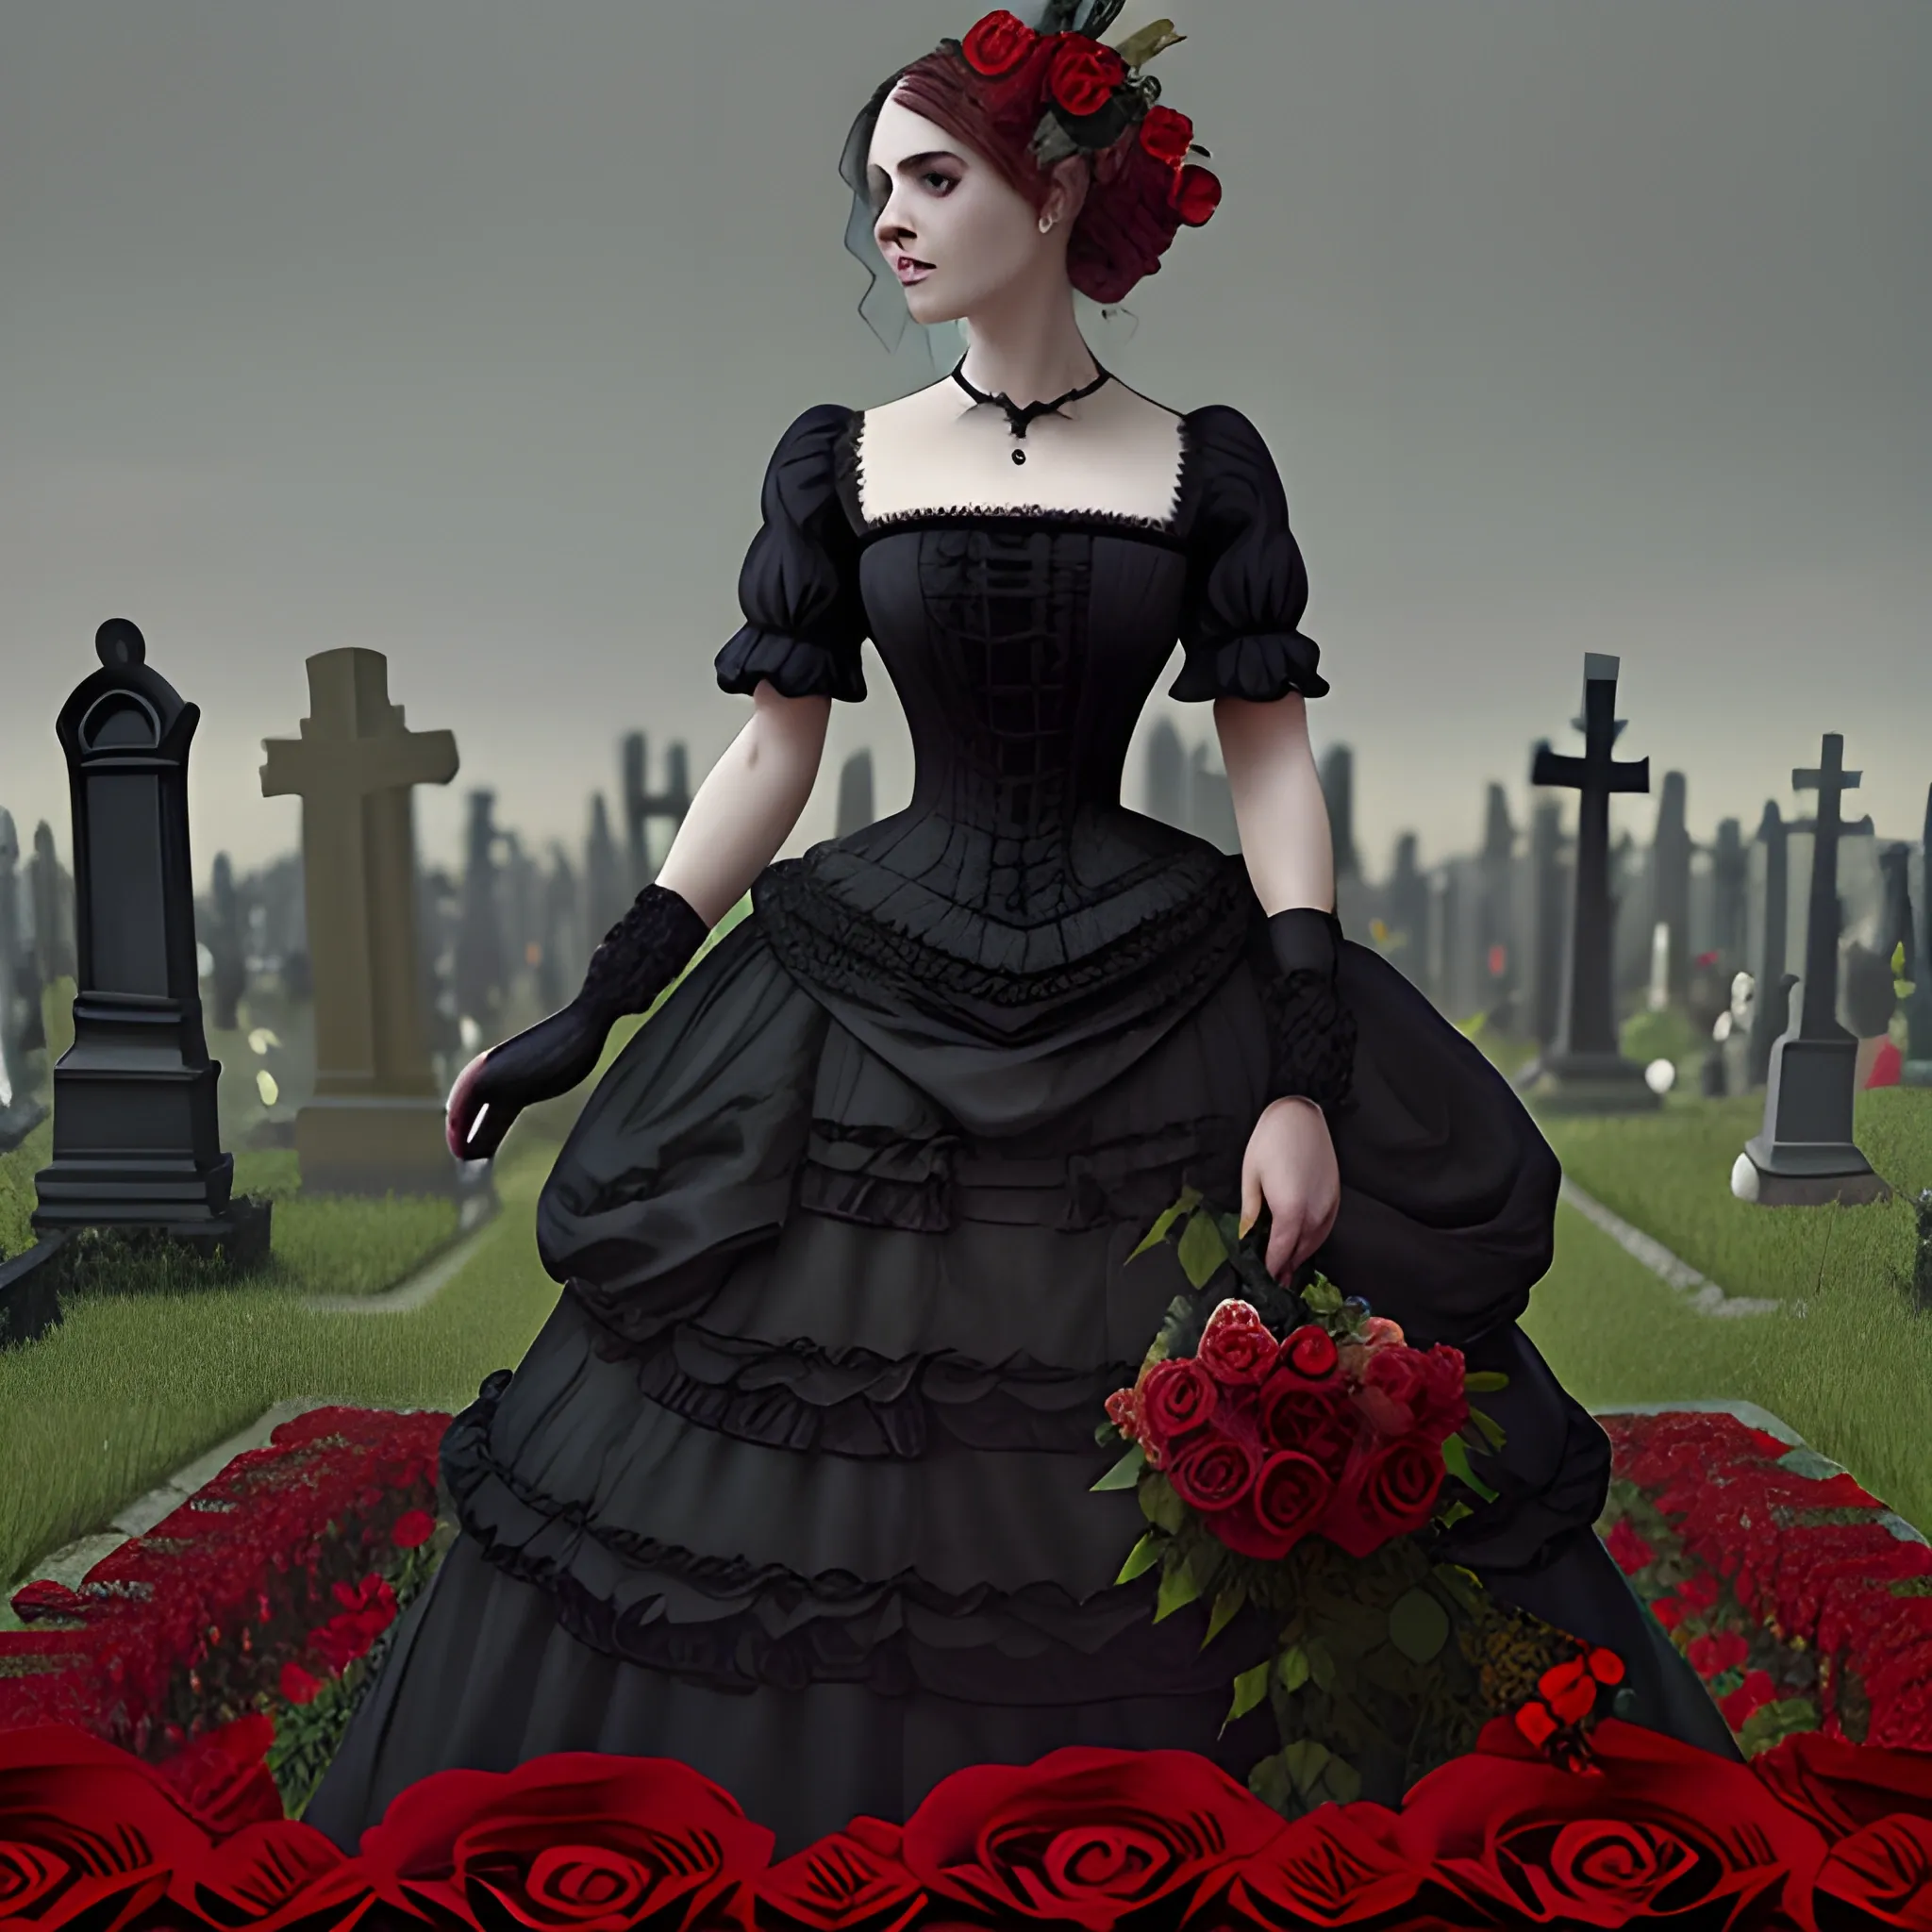 A woman in a Victorian dress, in the midst of a cemetery with red roses. Type of Image: Digital illustration. Art Styles: Realism, Gothic, Victorian. Art Inspirations: ArtStation, DeviantArt, Tim Burton's aesthetic. Camera: Close-up shot. Render Related Information: High resolution (4K), detailed and intricate details.